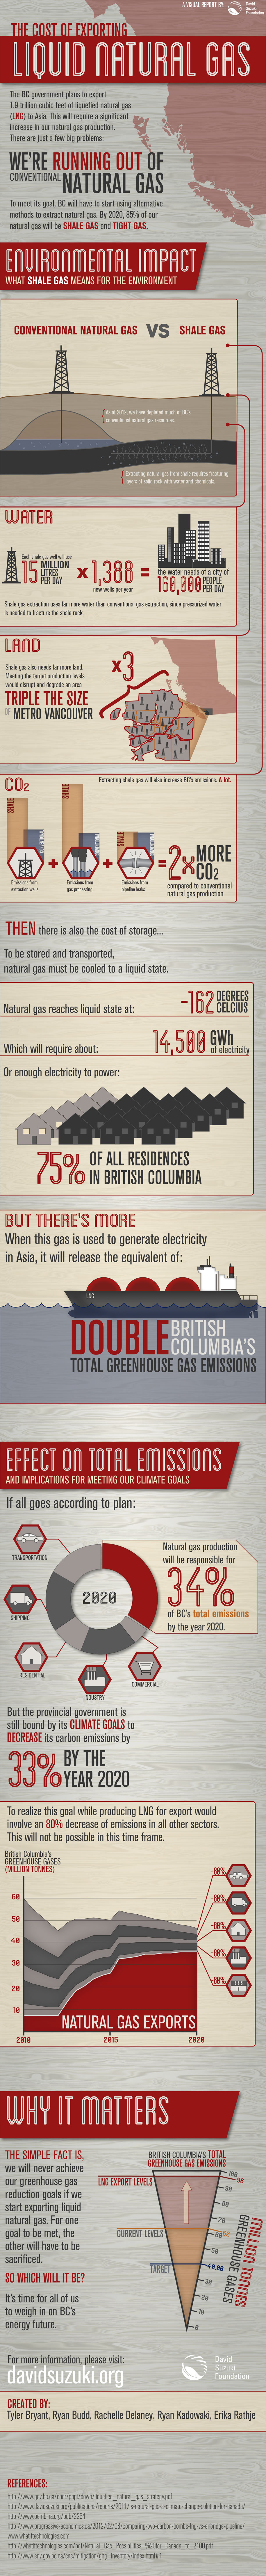 582px version of LNG Infographic, full size